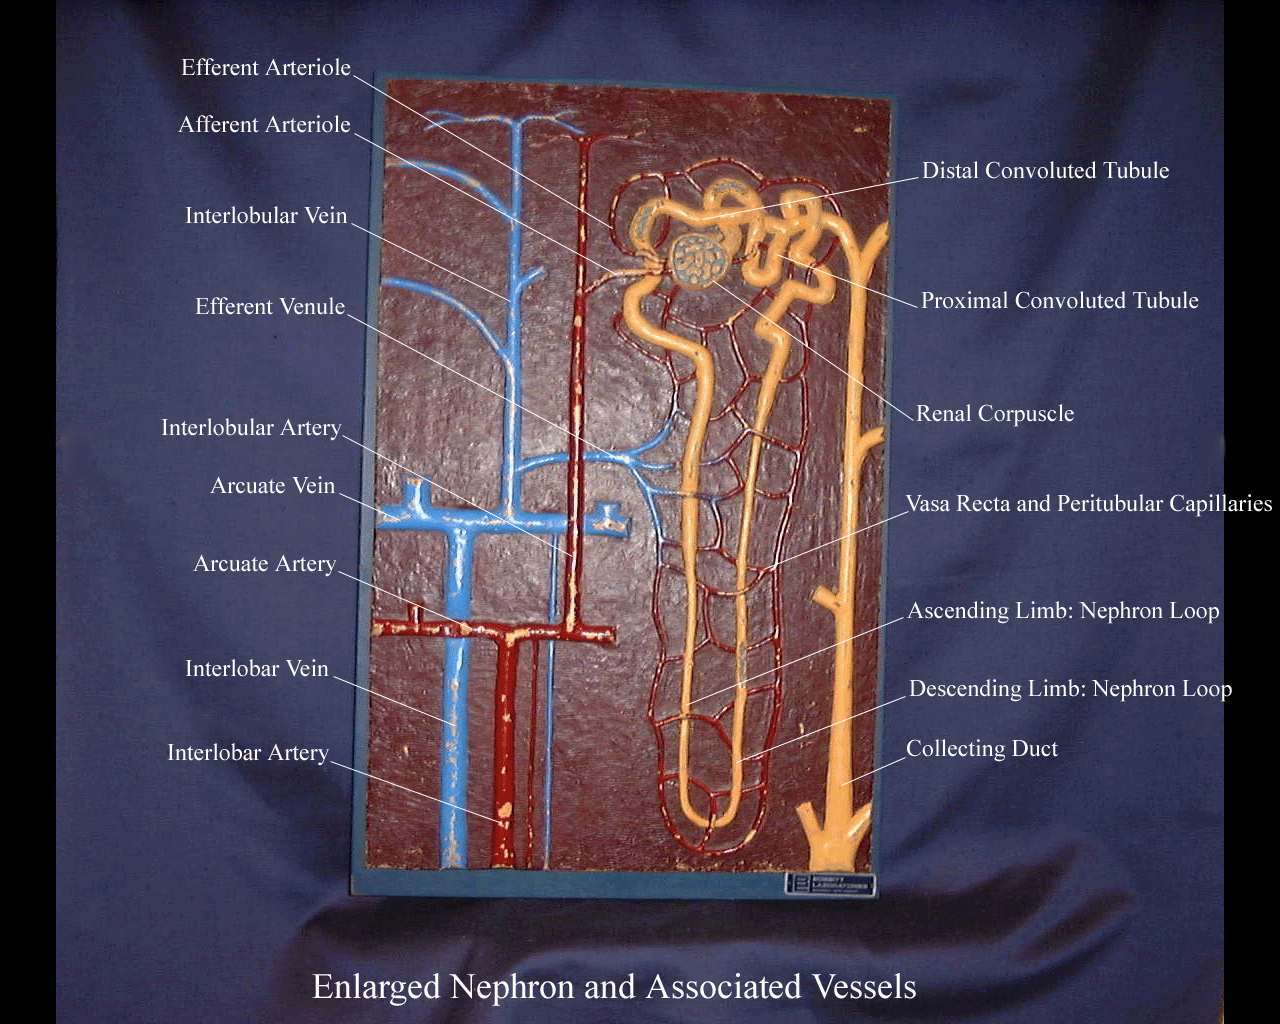 a labeled picture of a large nephron plaque